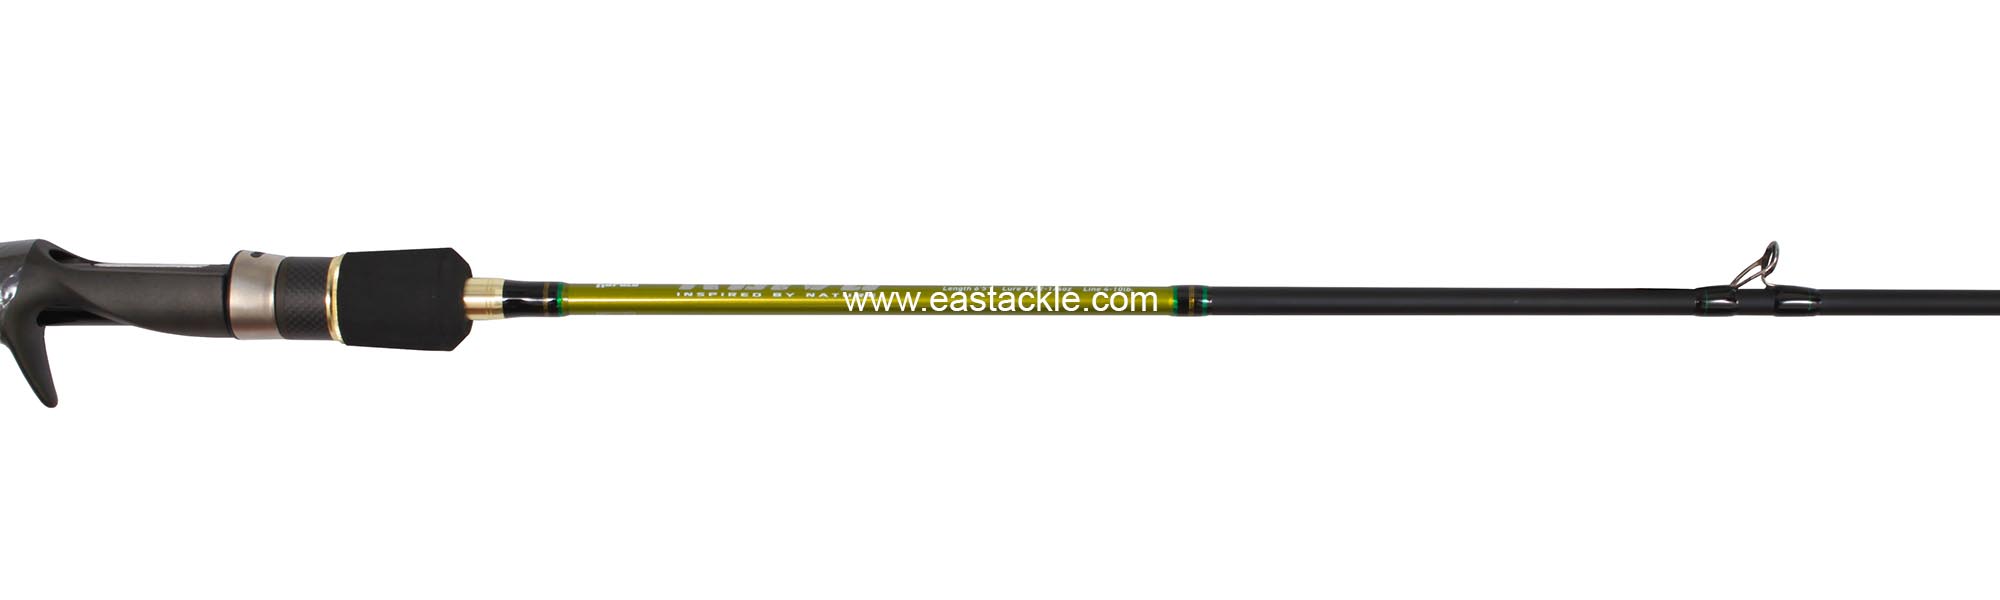 Rapala - Koivu - KVC652M - Bait Casting Rod - Reel Seat Fore Grip to Stripper Guide (Side View) | Eastackle